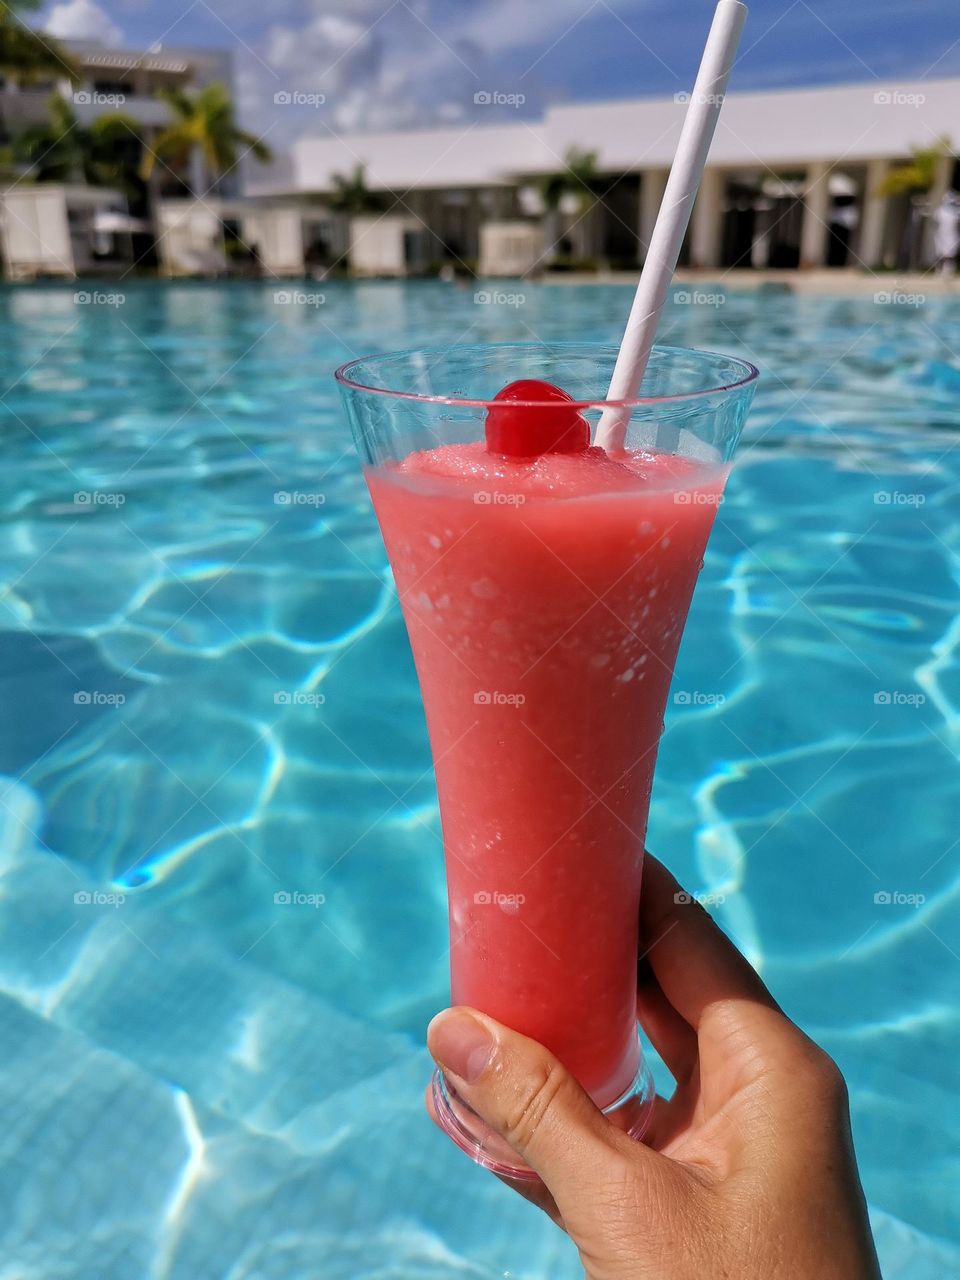 Summer treats. Refreshing and very delicious cocktail. Summer time, summer mood, summer day. Relax and enjoy every moment.